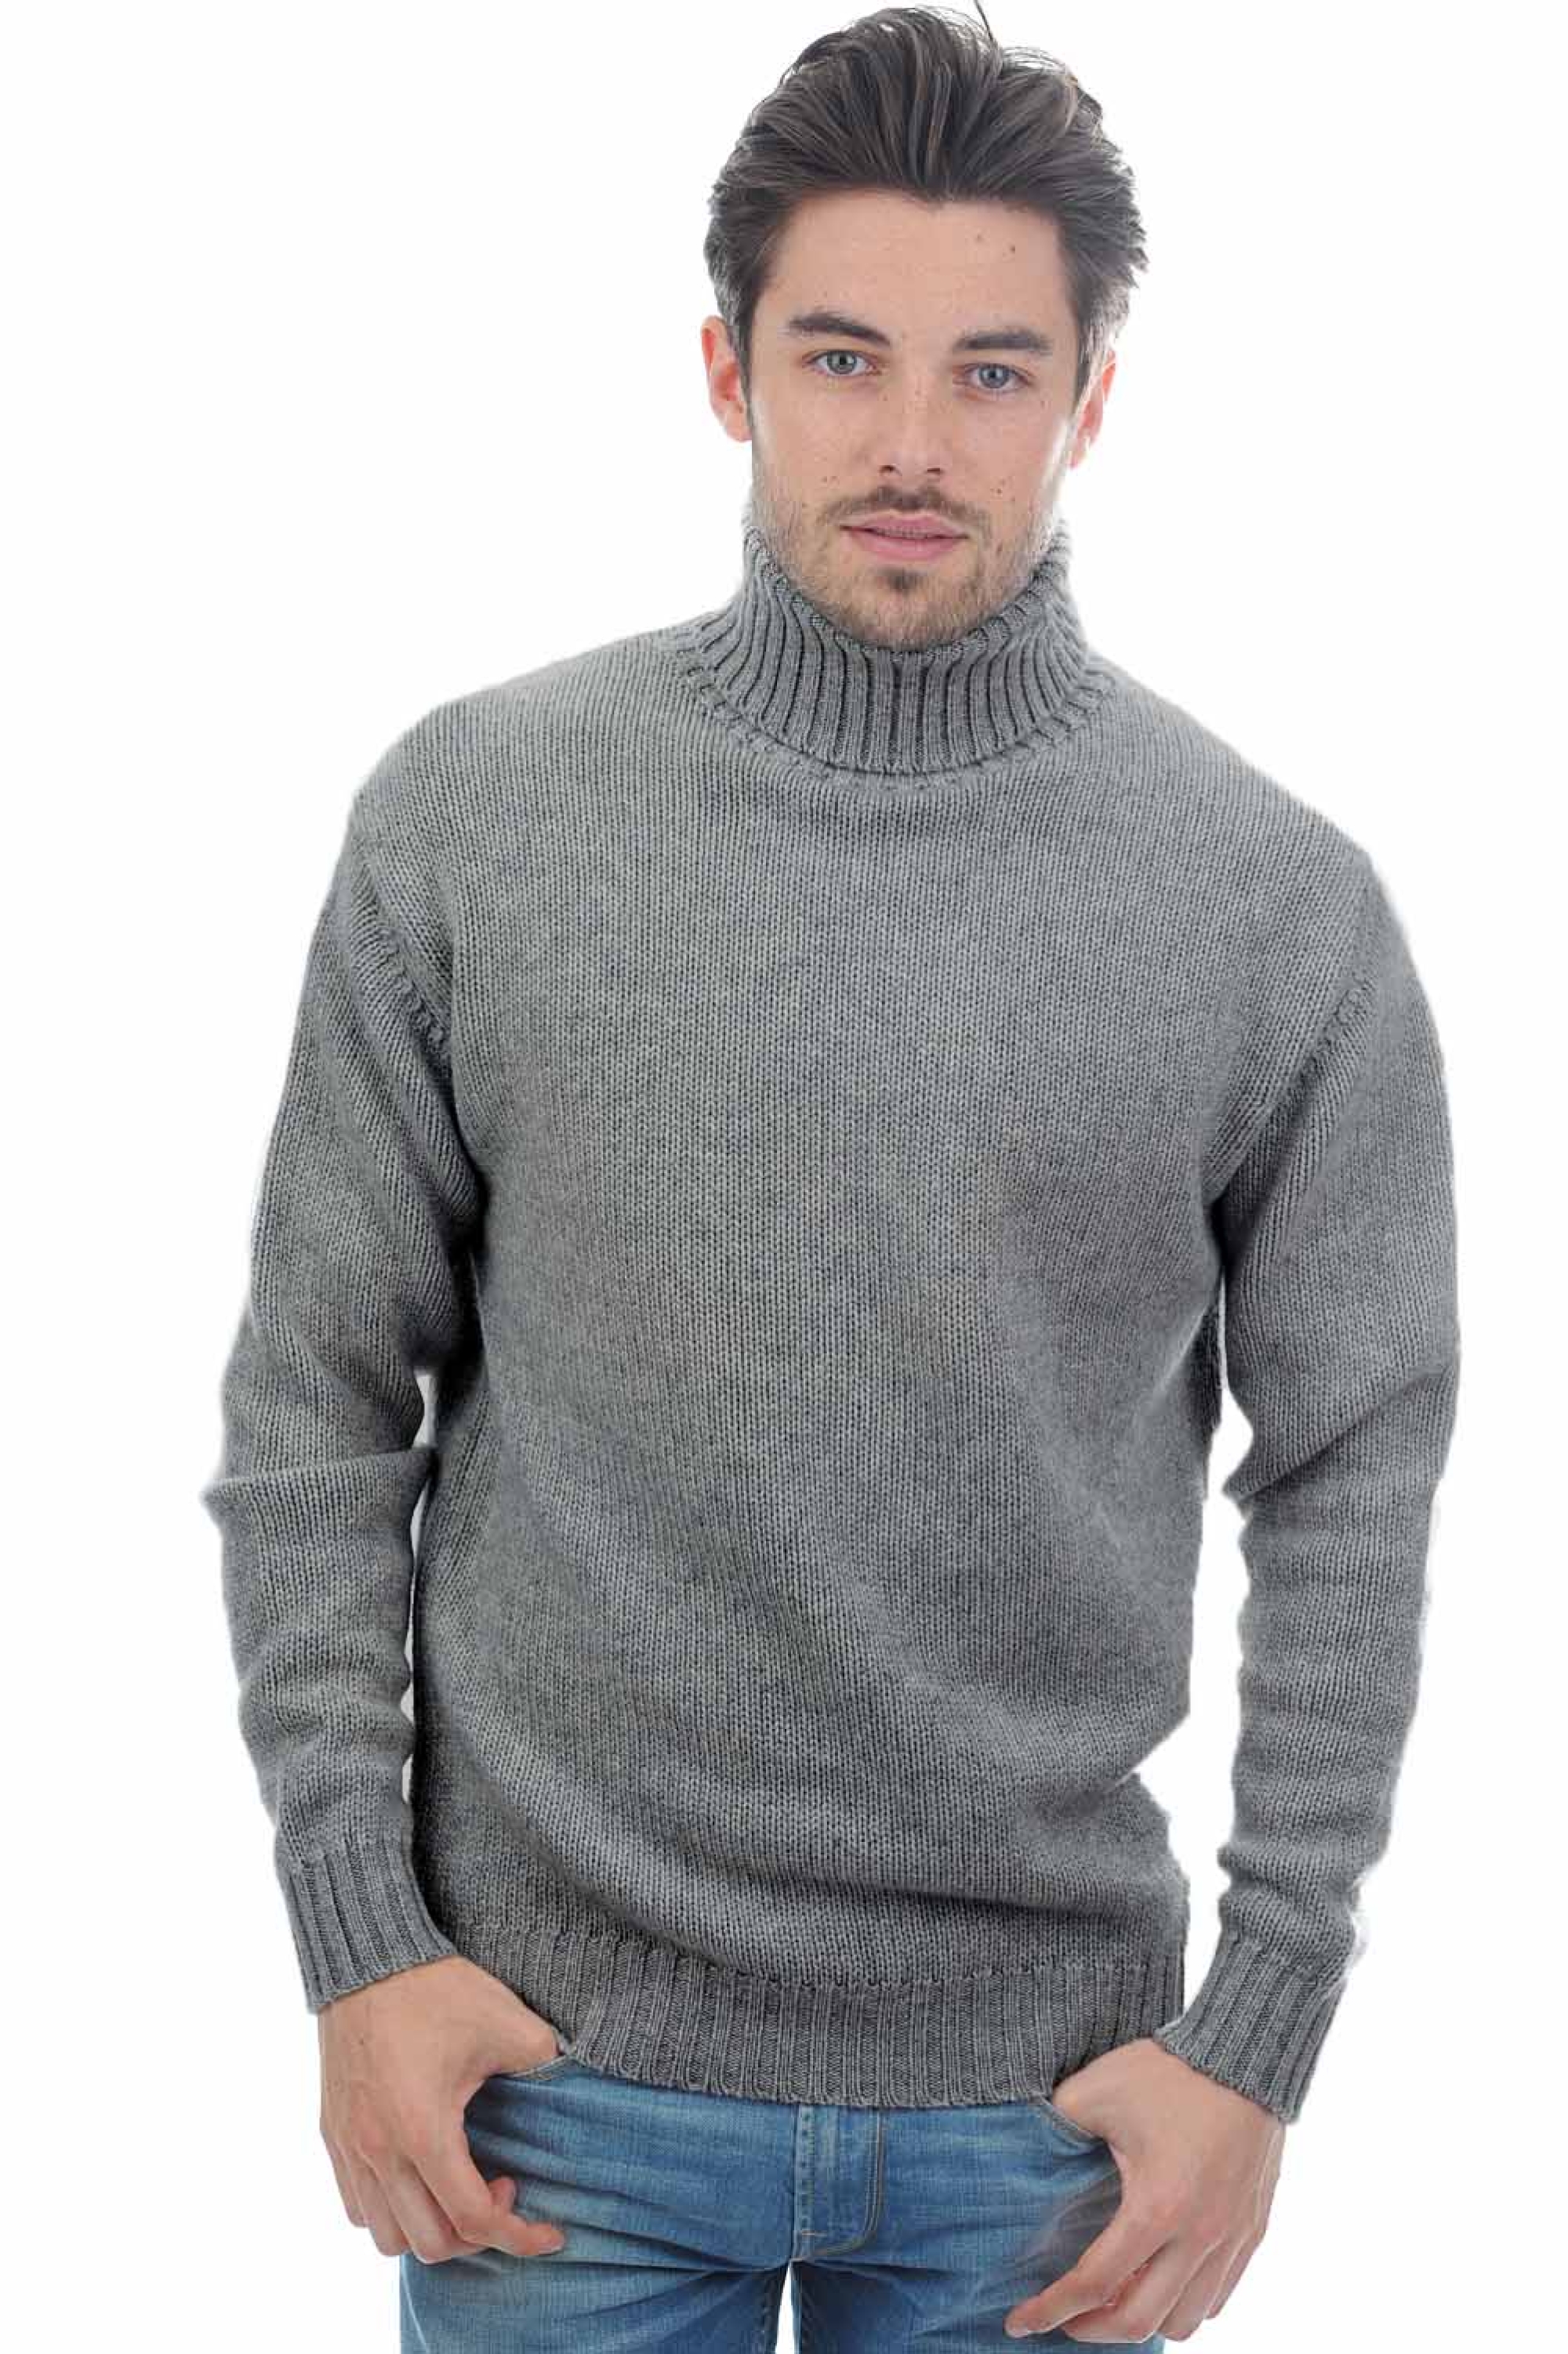 Cashmere men chunky sweater achille grey marl 4xl